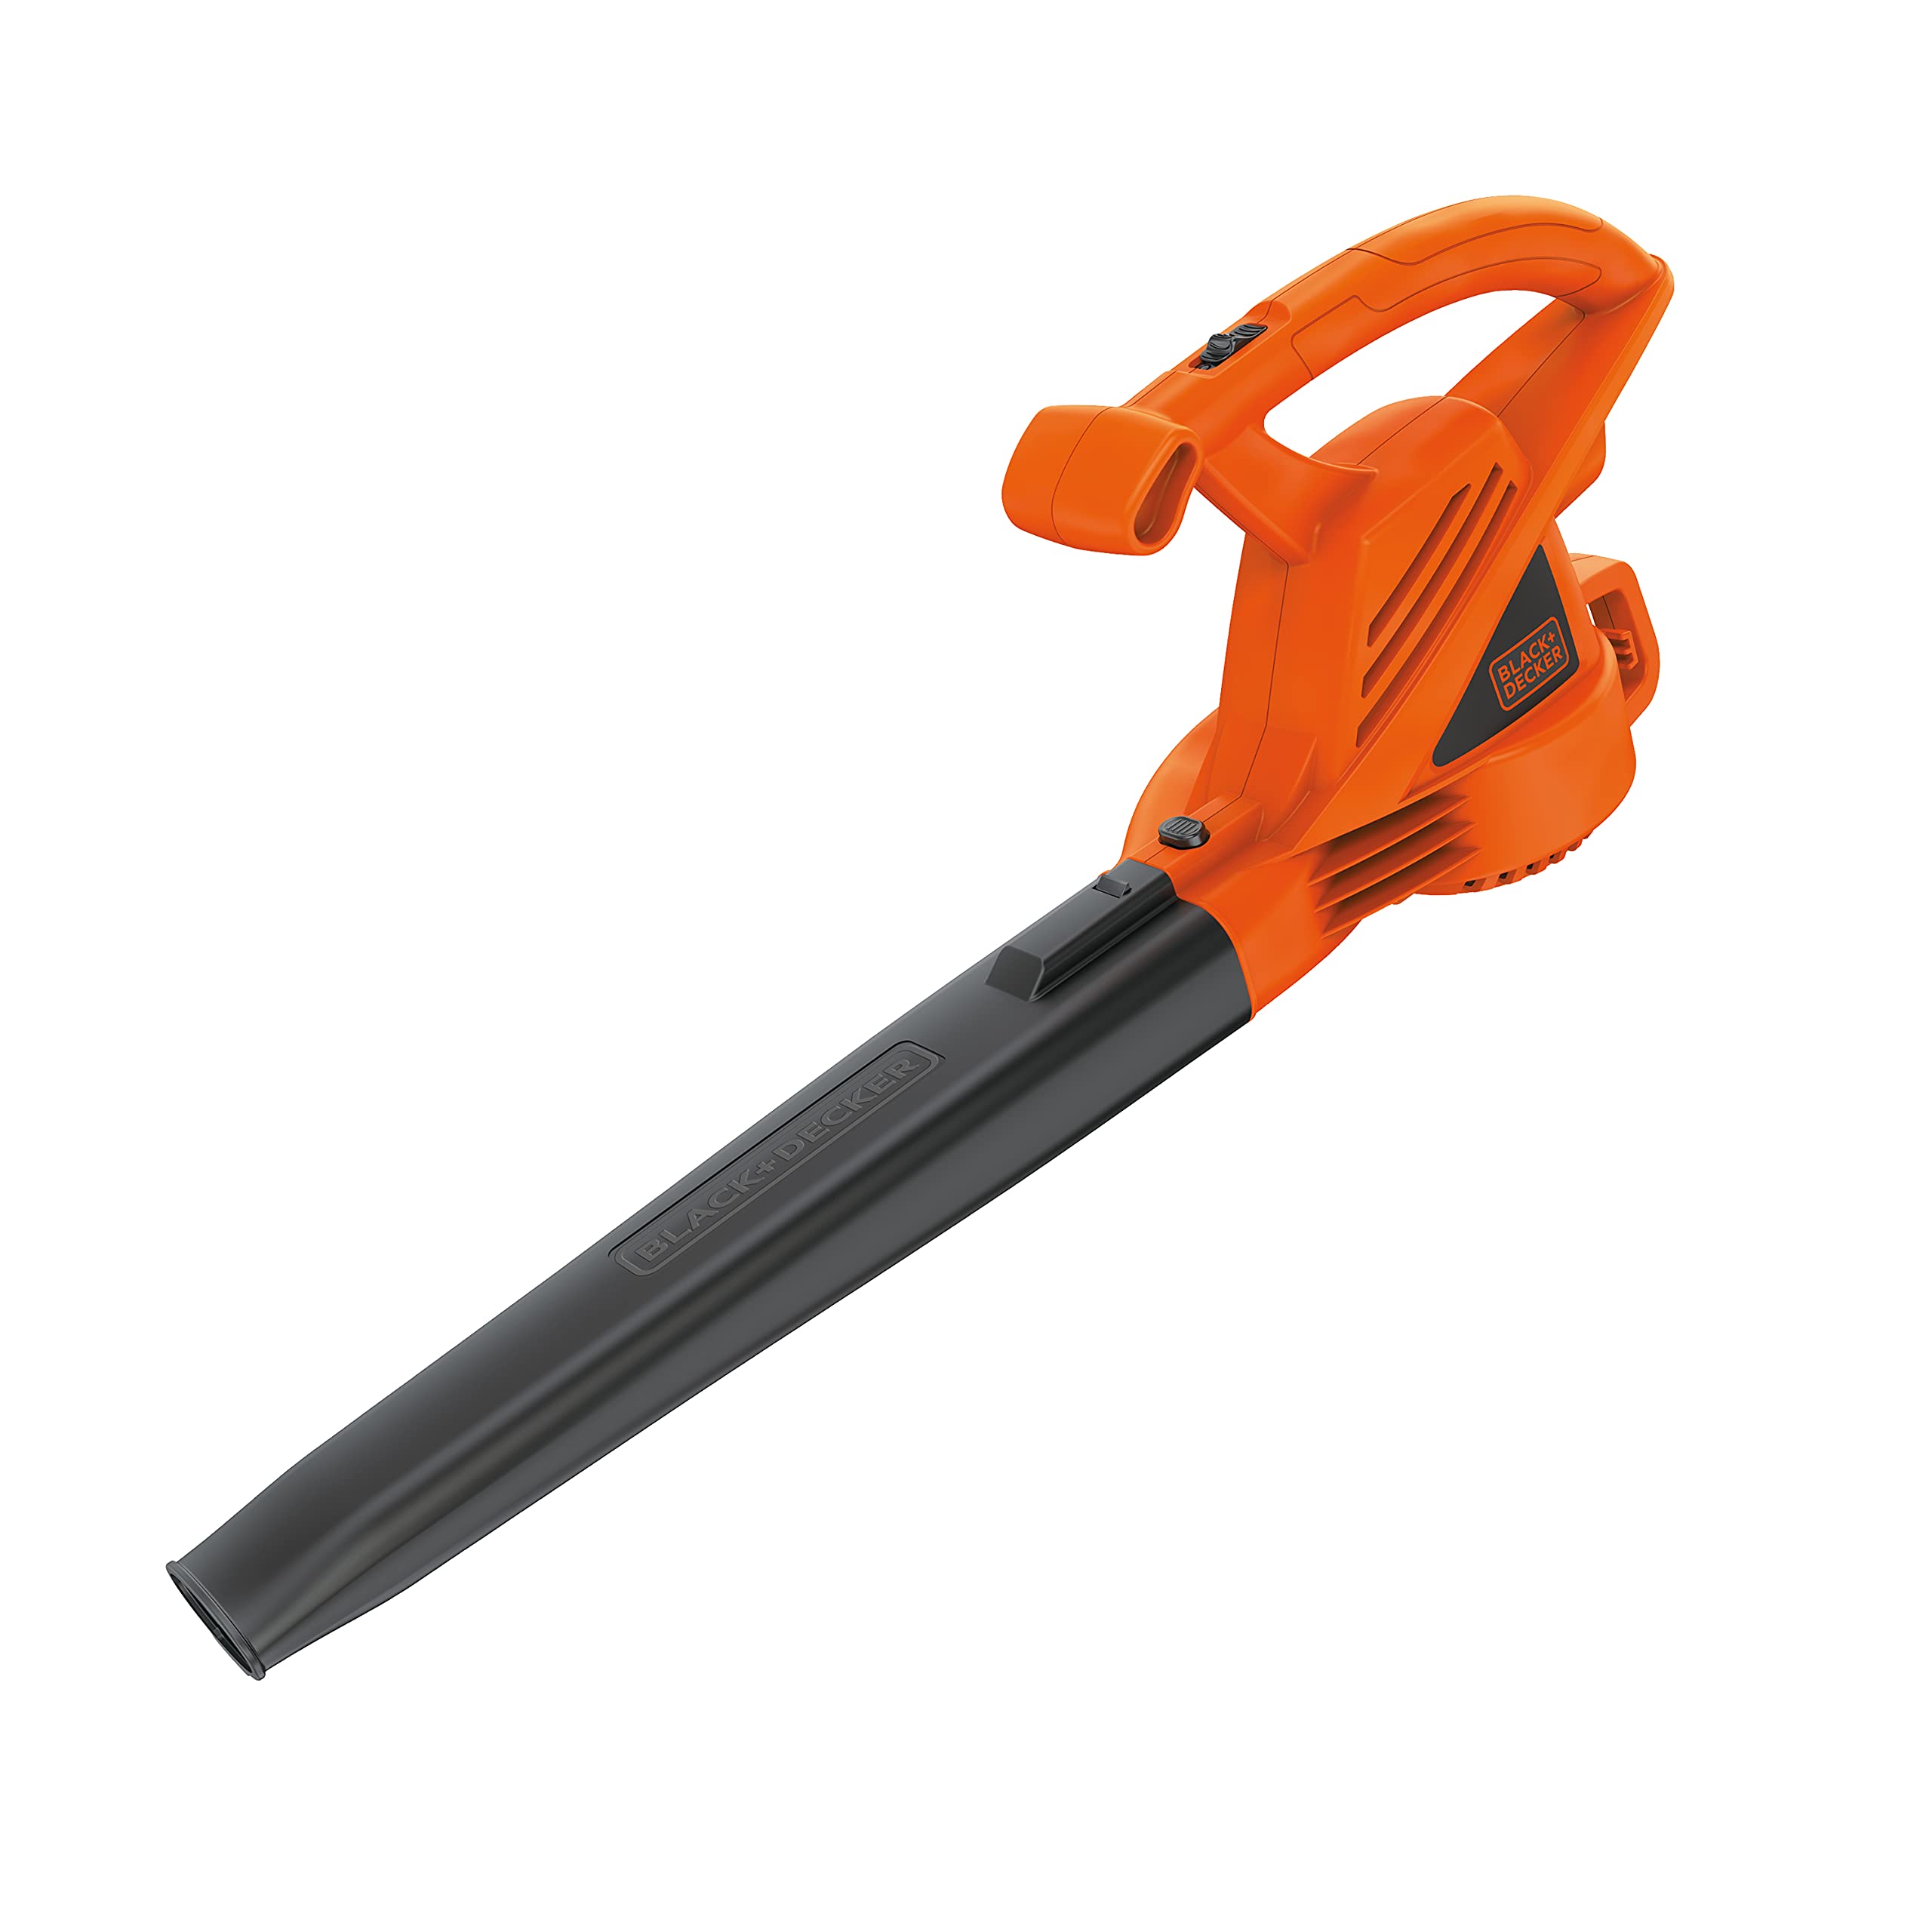 BLACK+DECKER Electric Leaf Blower, 7-Amp (LB700),Pack of 1 Blower Only